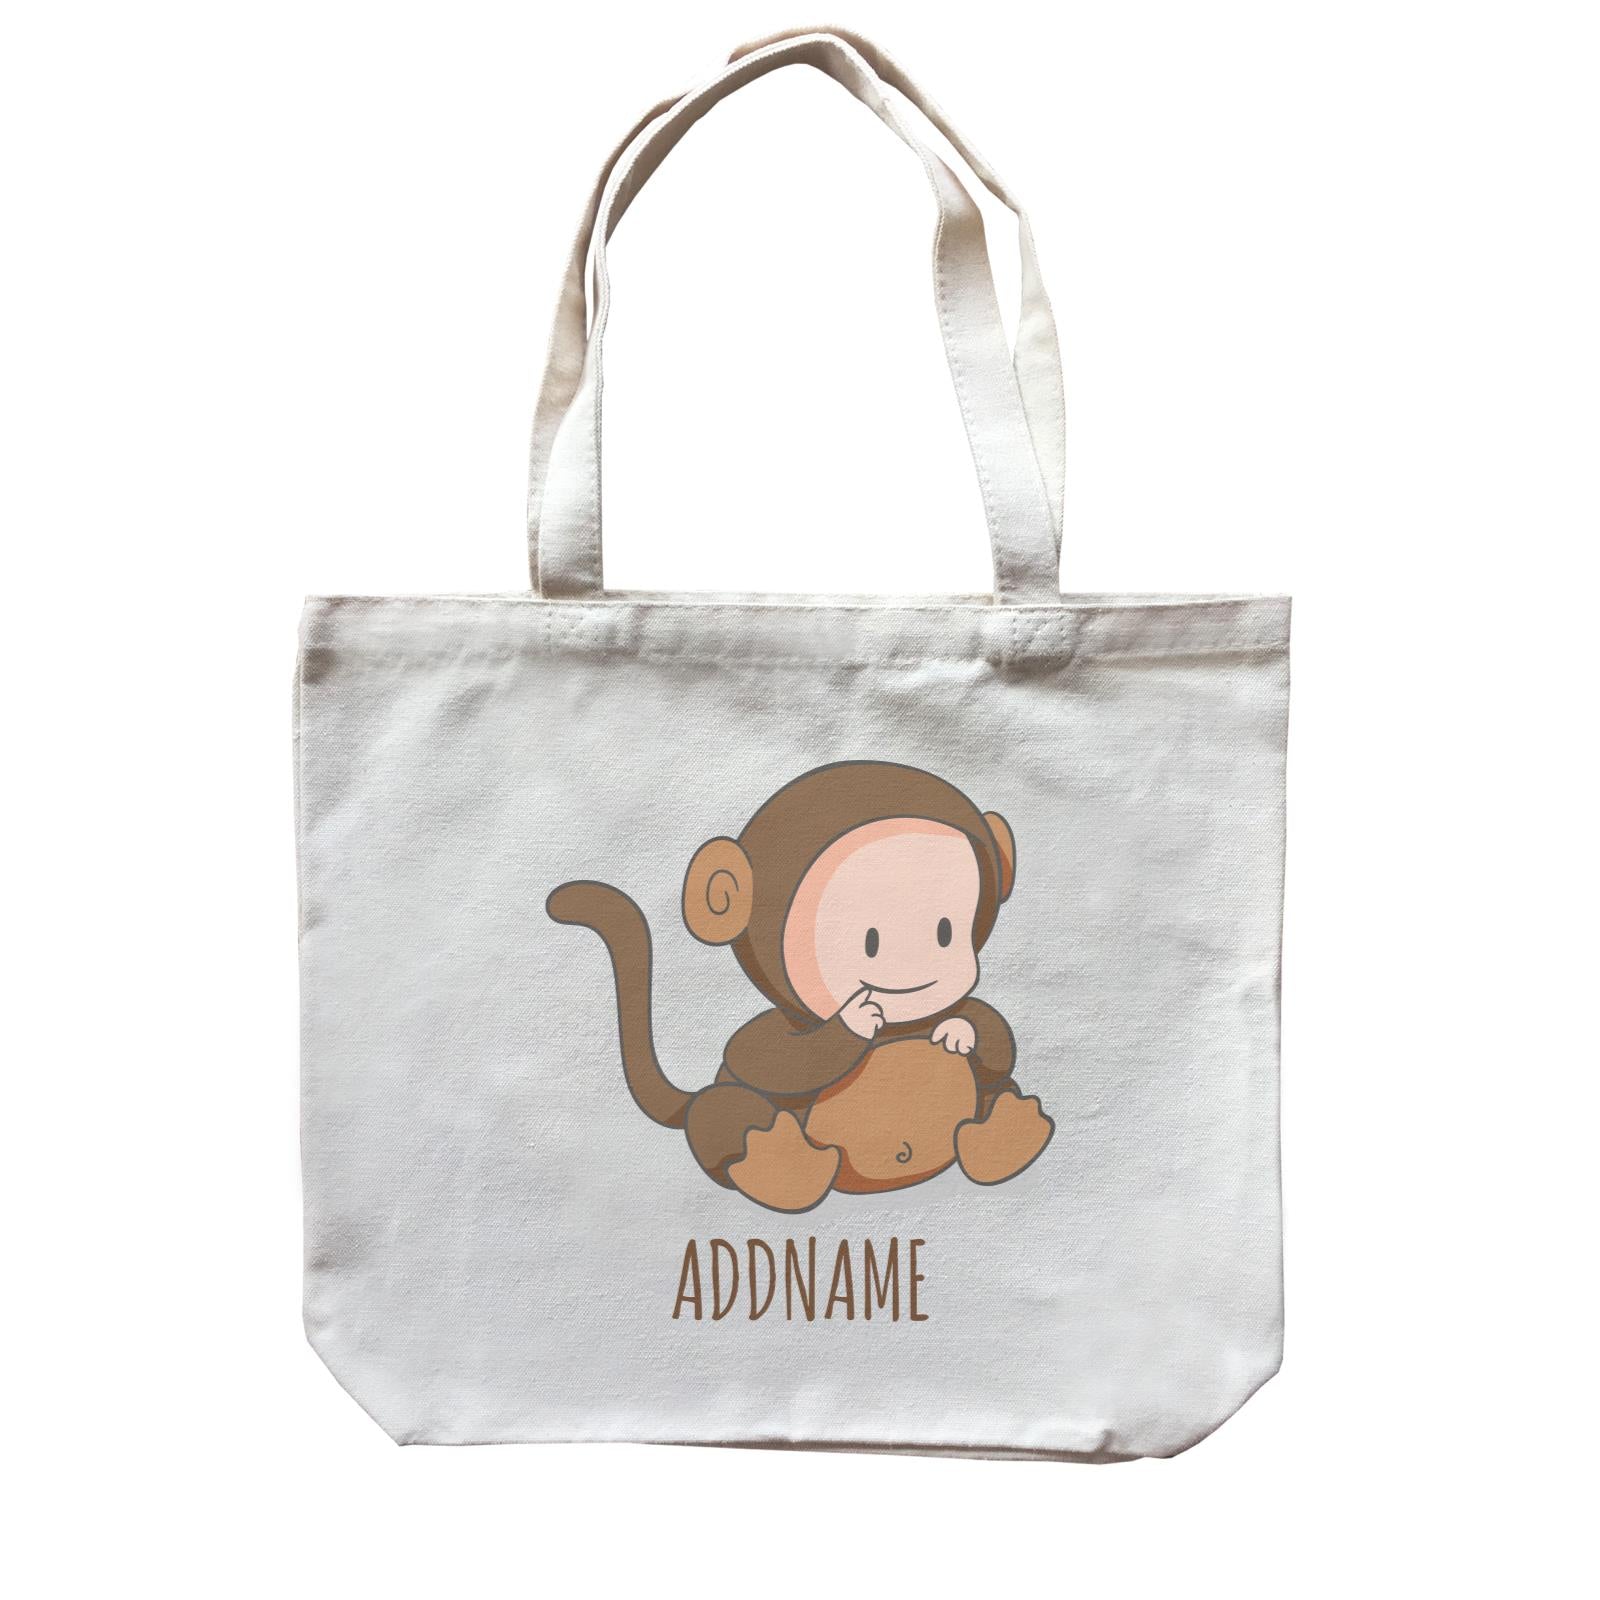 Cute Baby in Brown Monkey Suit Addname Canvas Bag